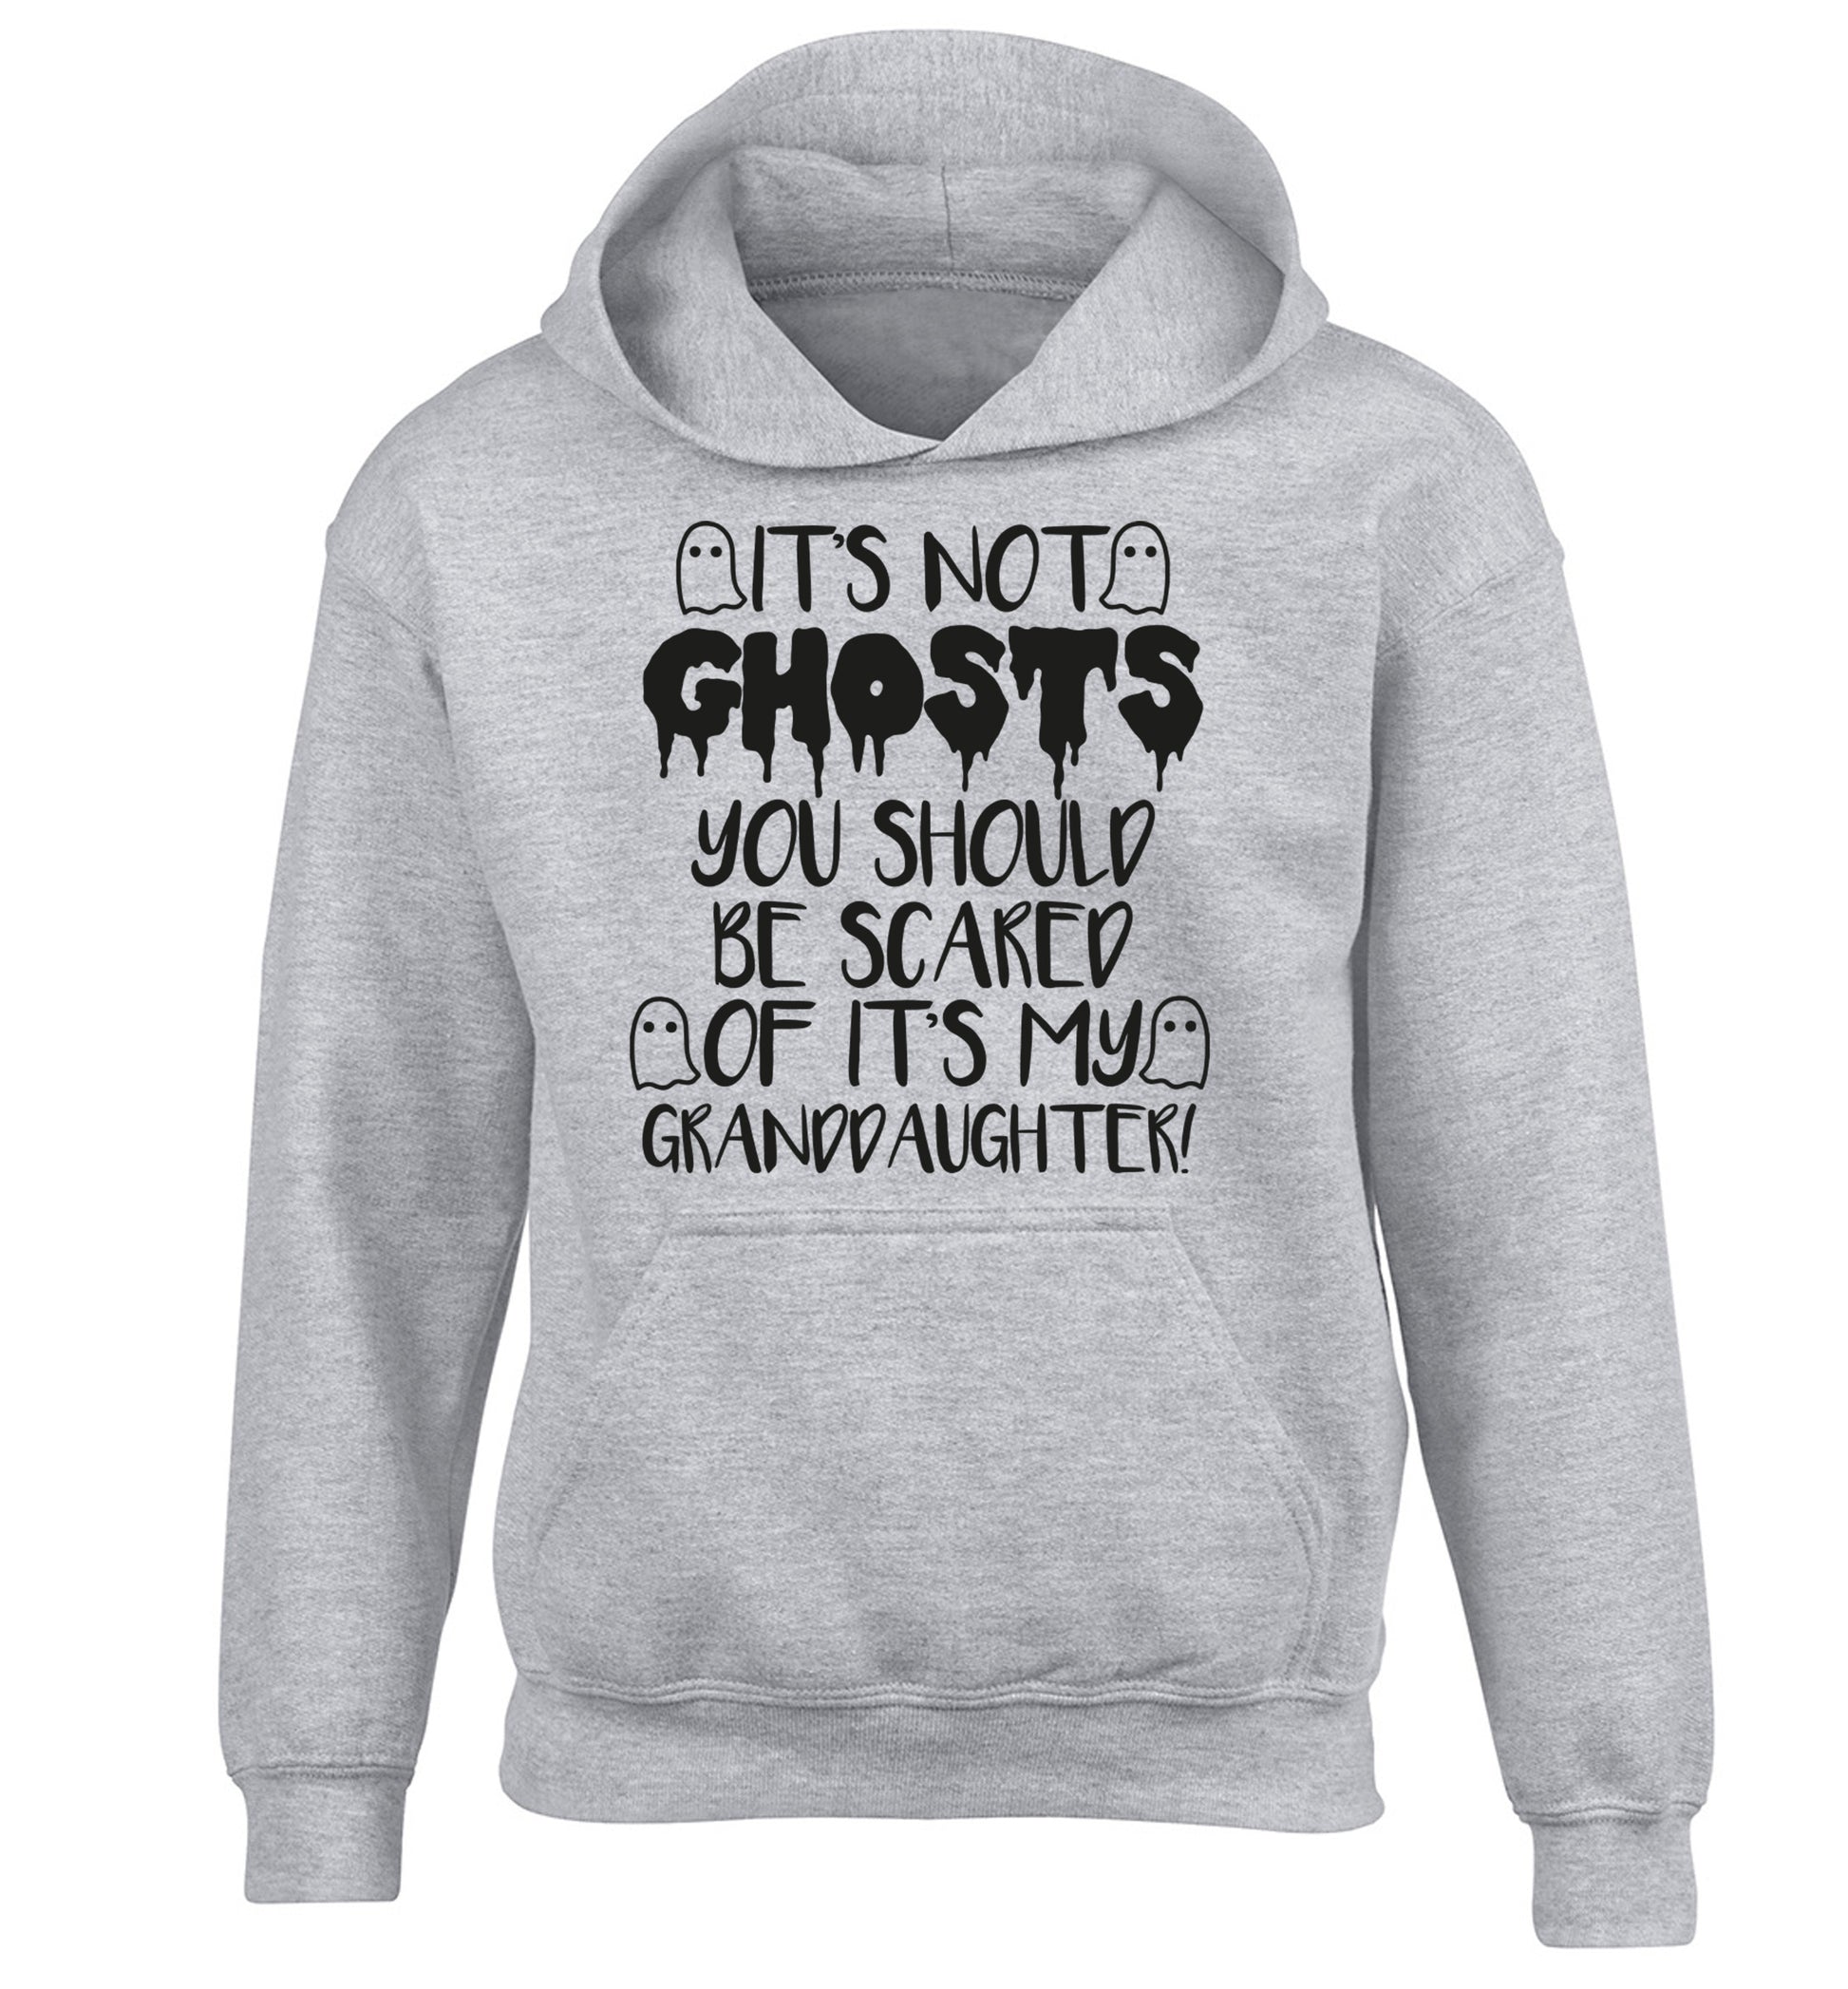 It's not ghosts you should be scared of it's my granddaughter! children's grey hoodie 12-14 Years